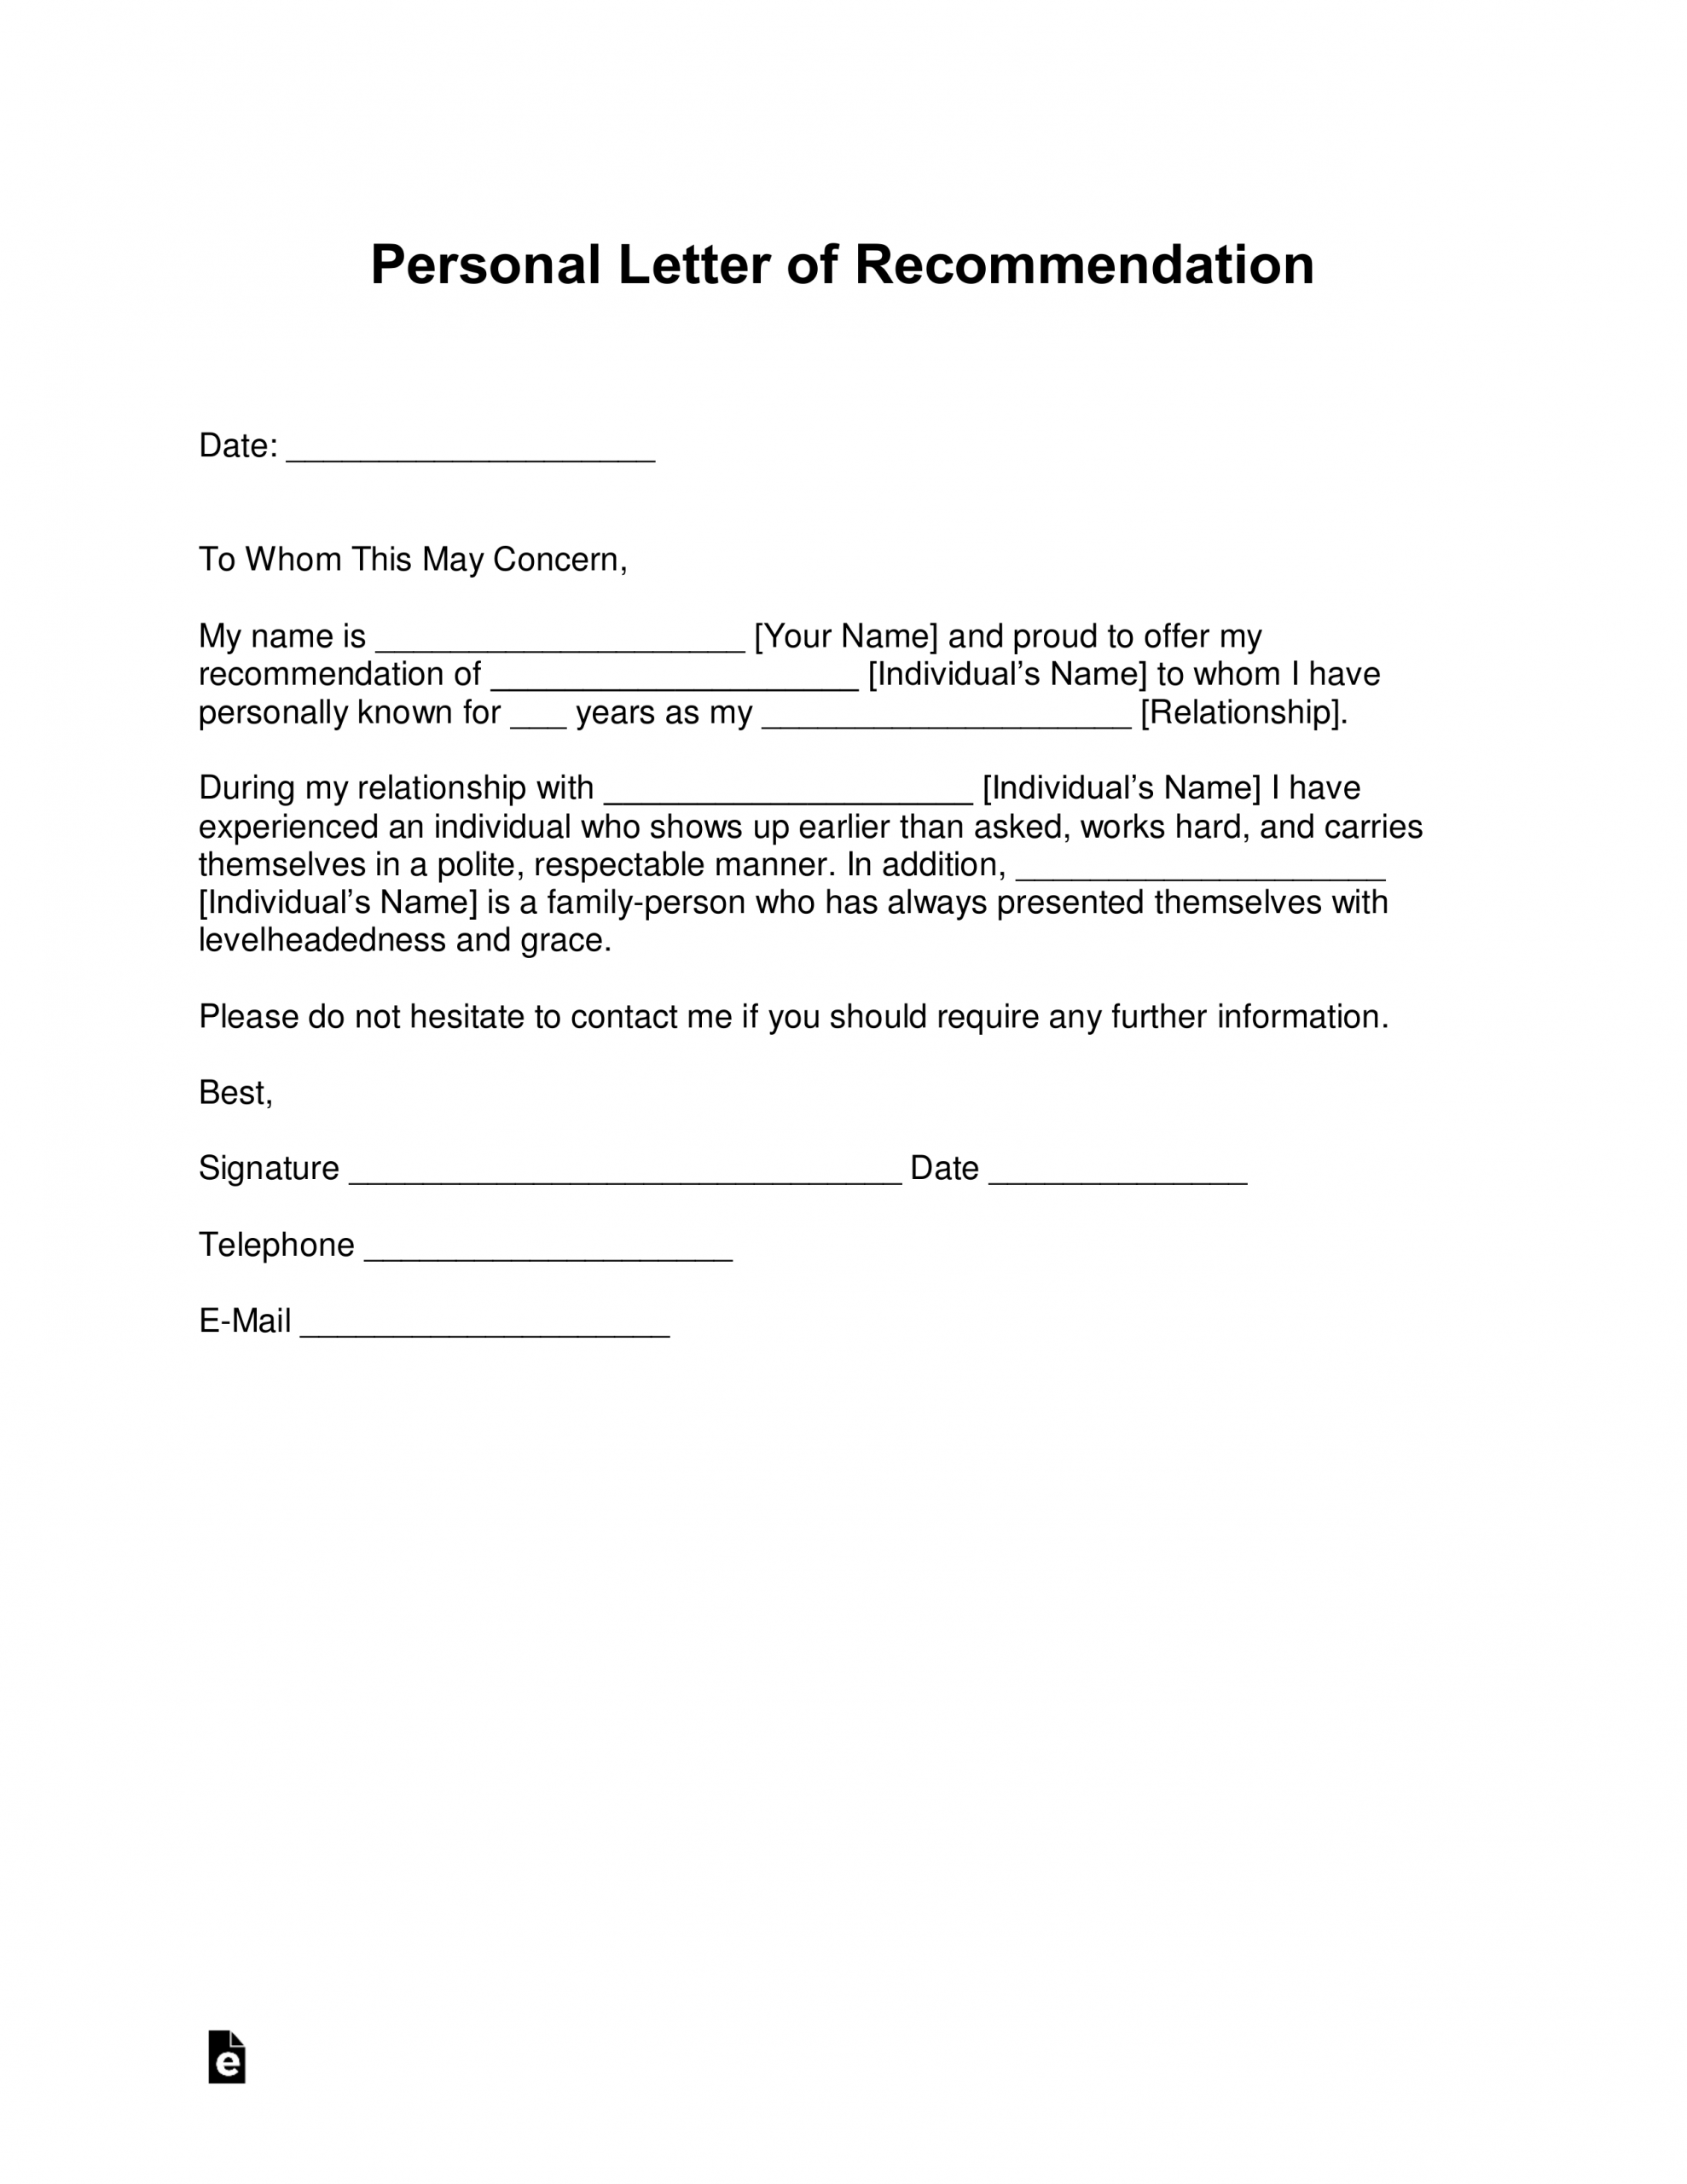 Free Personal Letter Of Recommendation Template For A in proportions 2550 X 3301